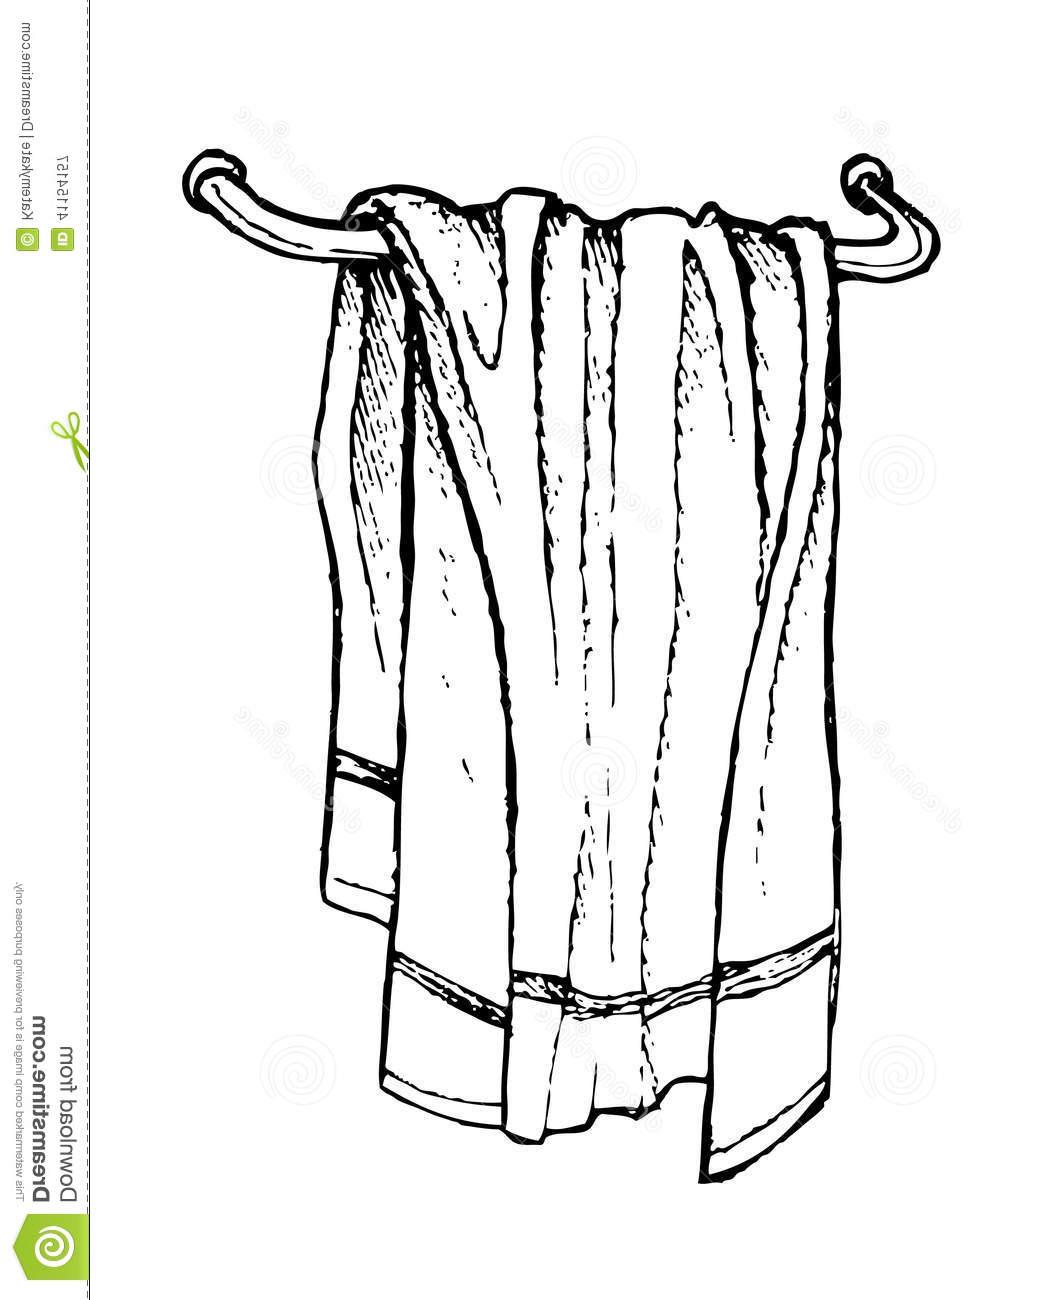 Towel clipart black and white